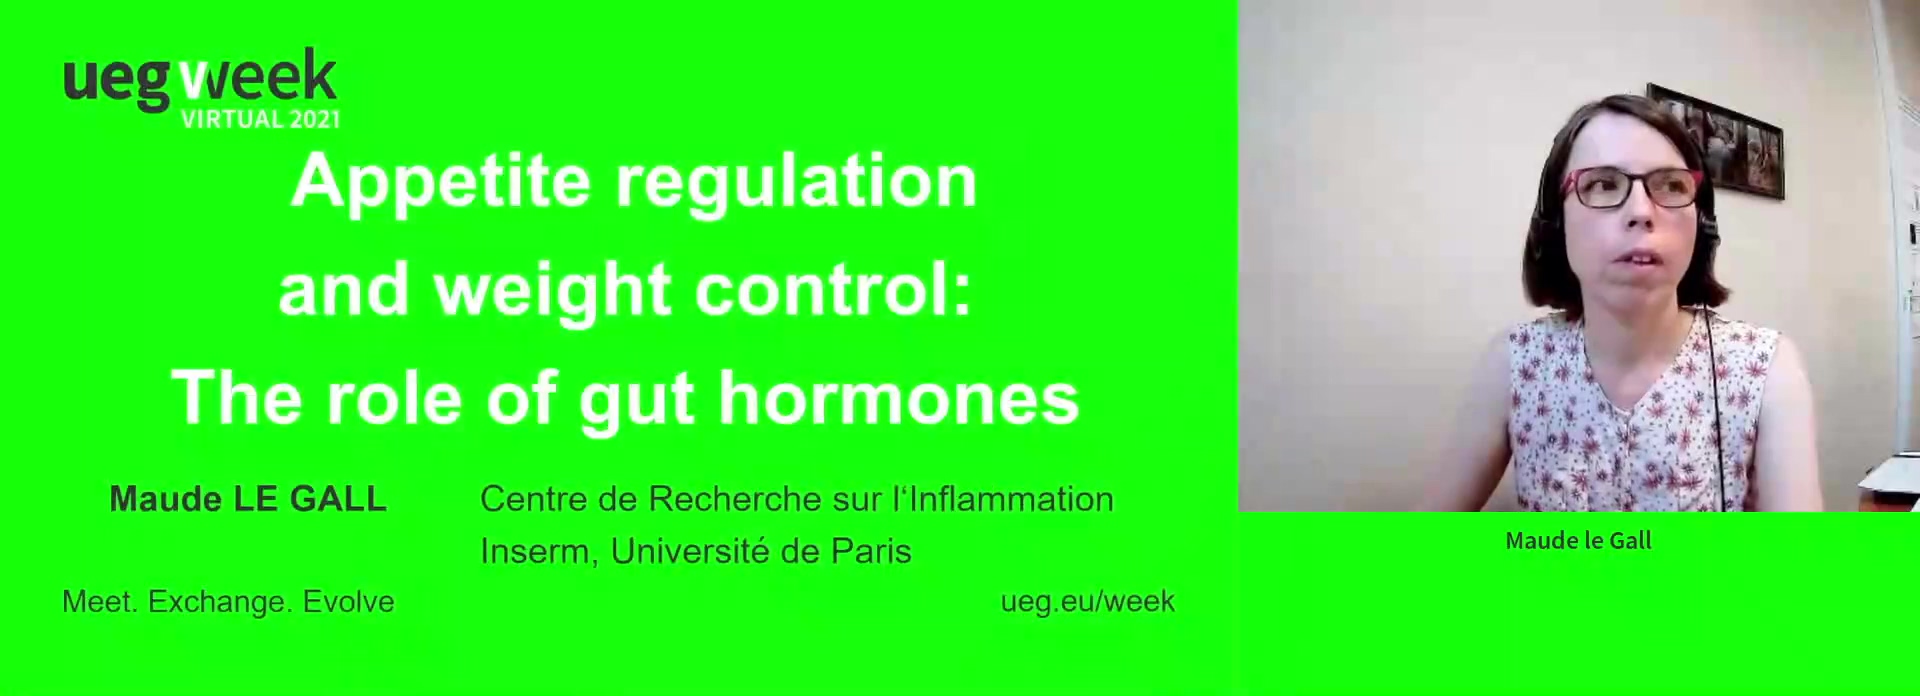 Appetite regulation and weight control: The role of gut hormones